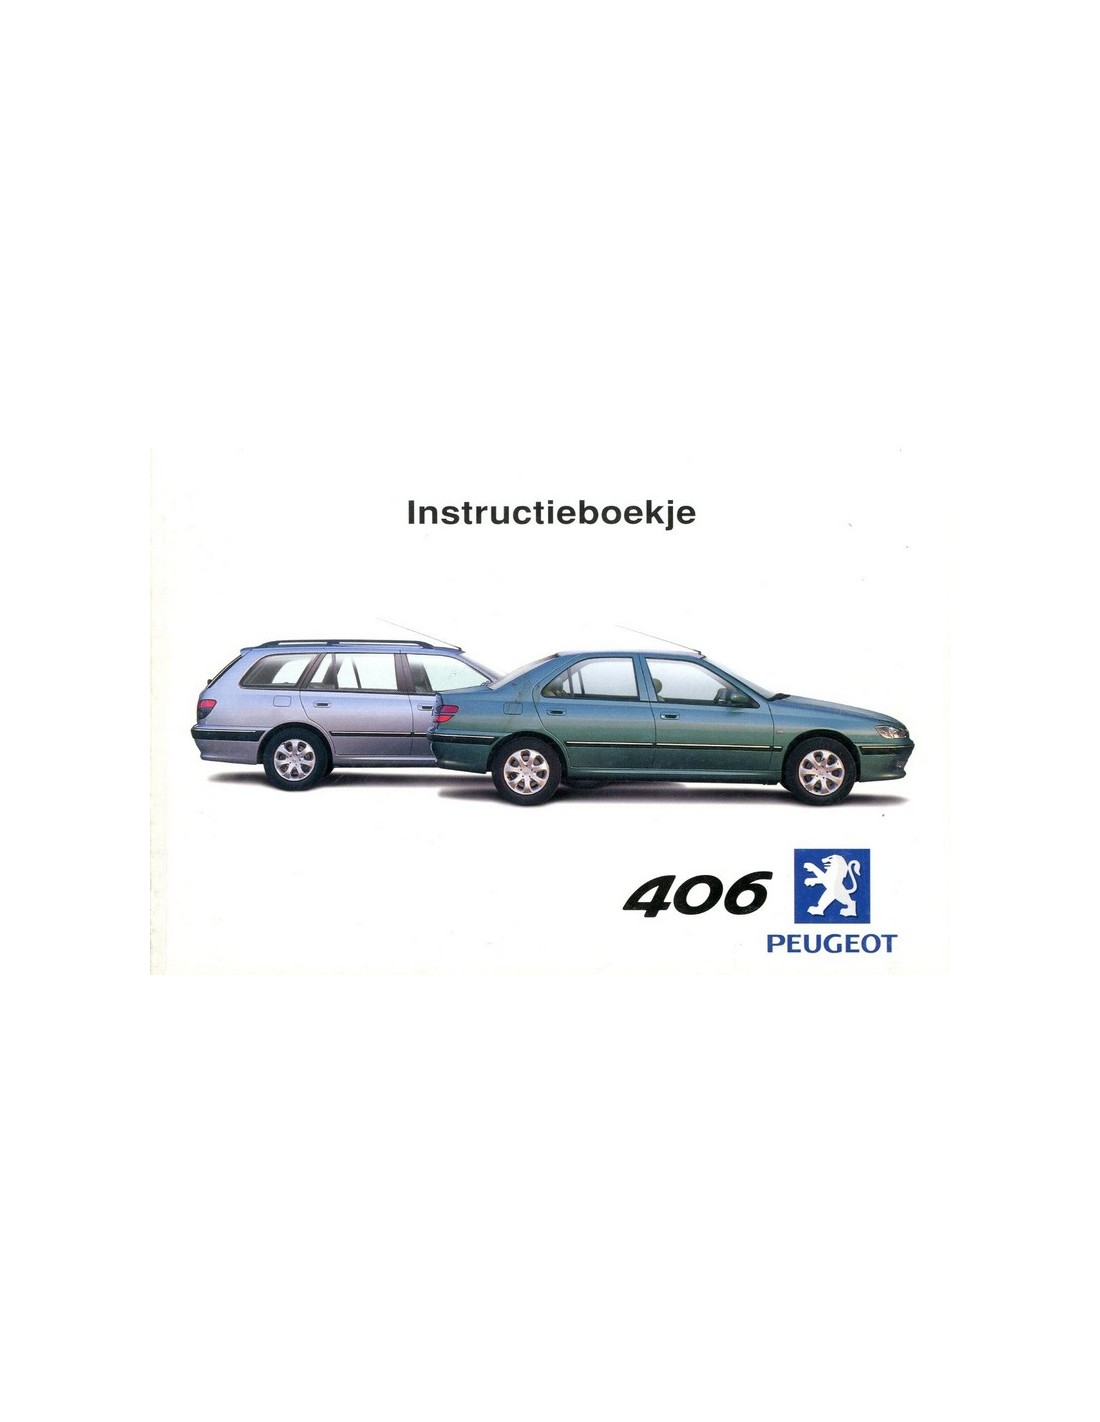 Peugeot 406 owners manual free download